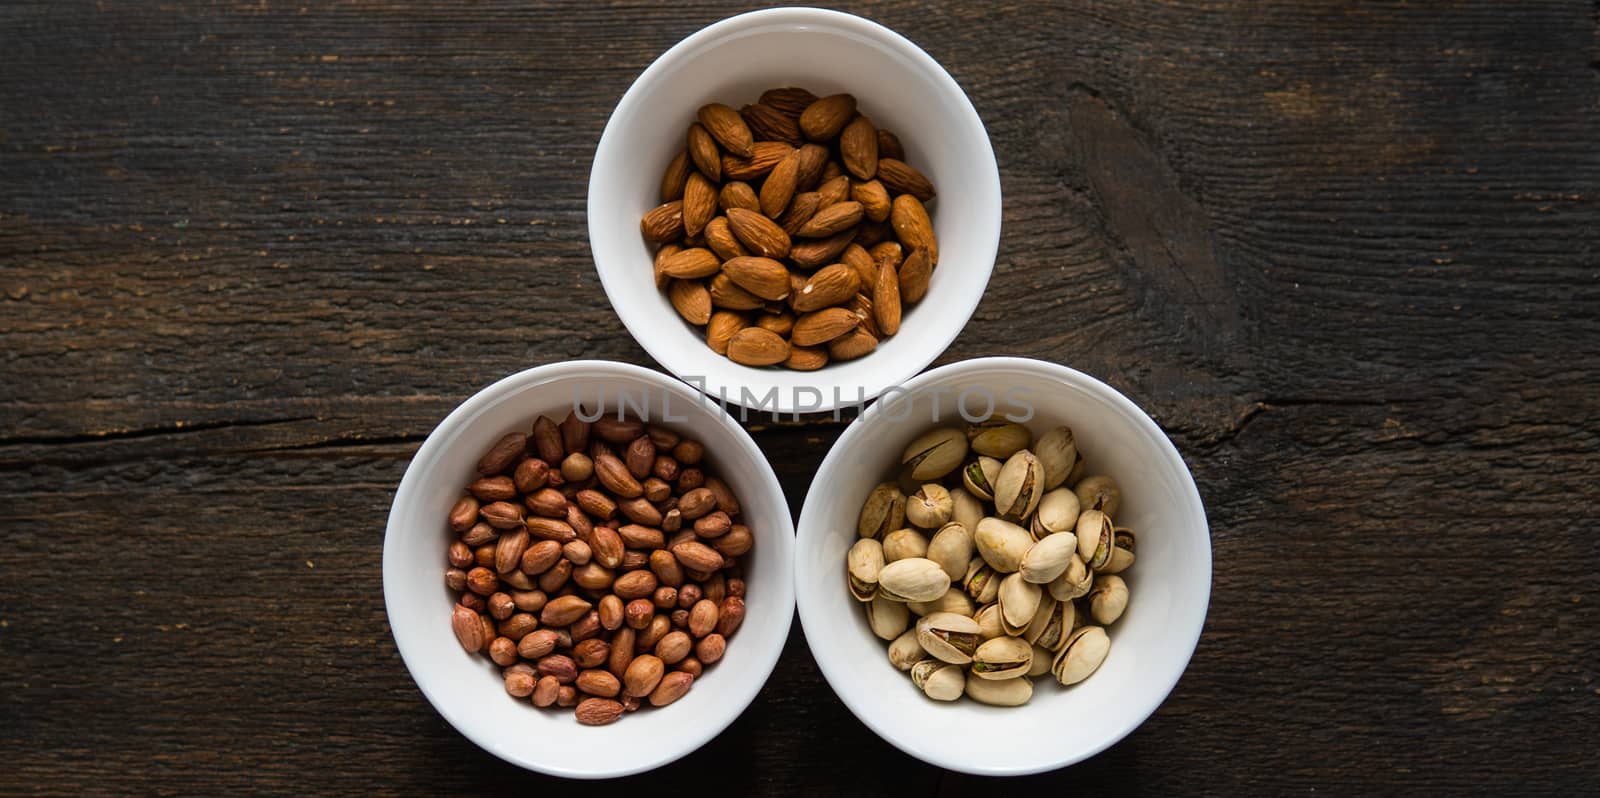 Pistachio, peanut and almond in a small plates which standing on a black table. Nuts is a healthy vegetarian protein and nutritious food. by vovsht